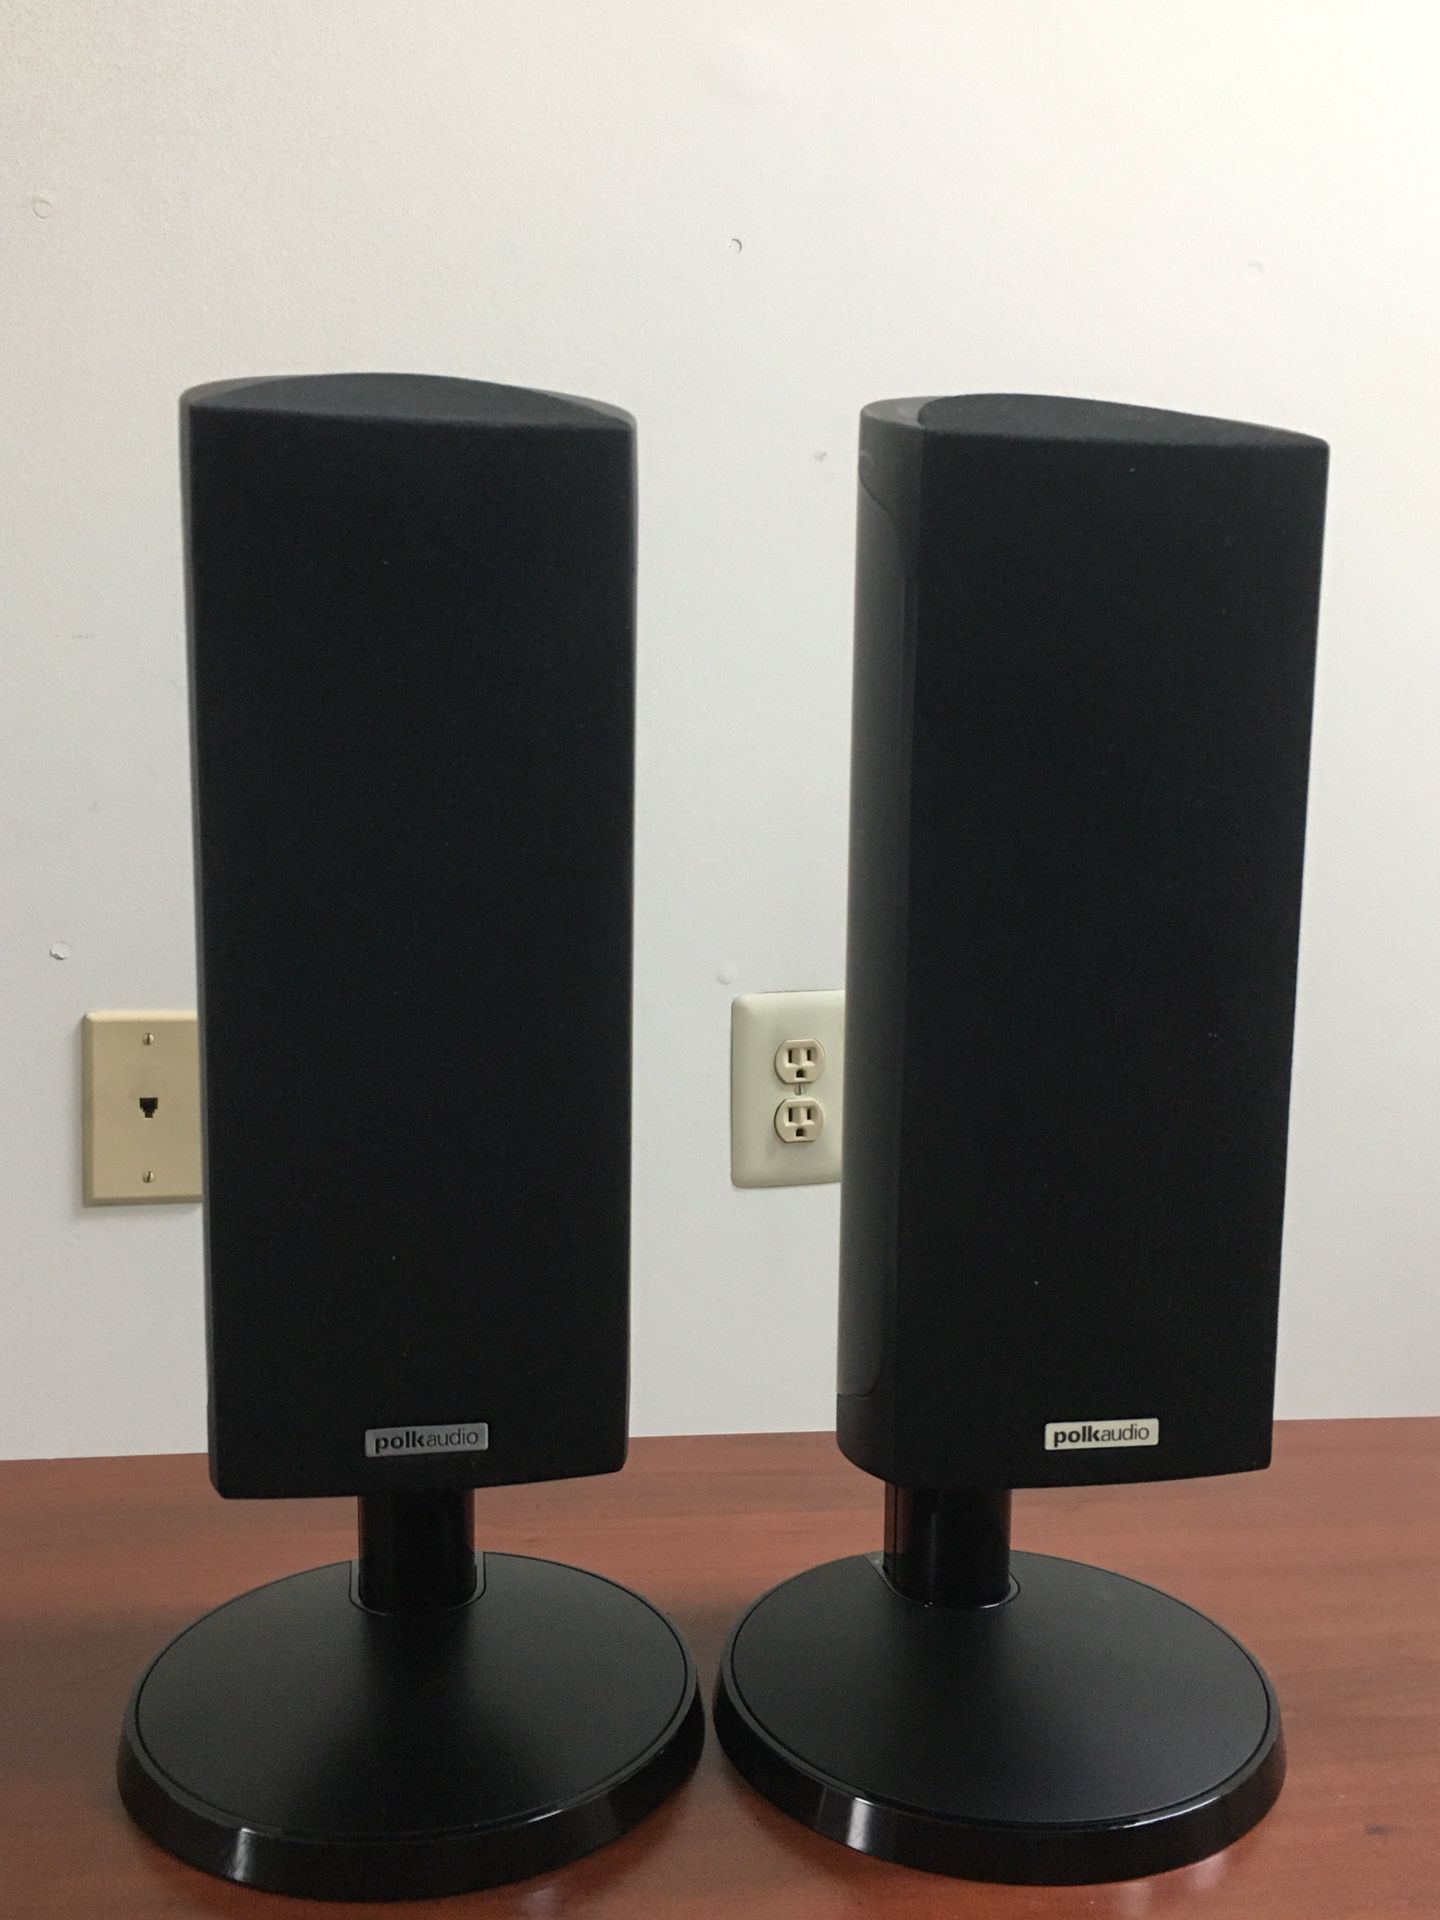 Polk audio luxury high end RM 201 speakers with stands!!